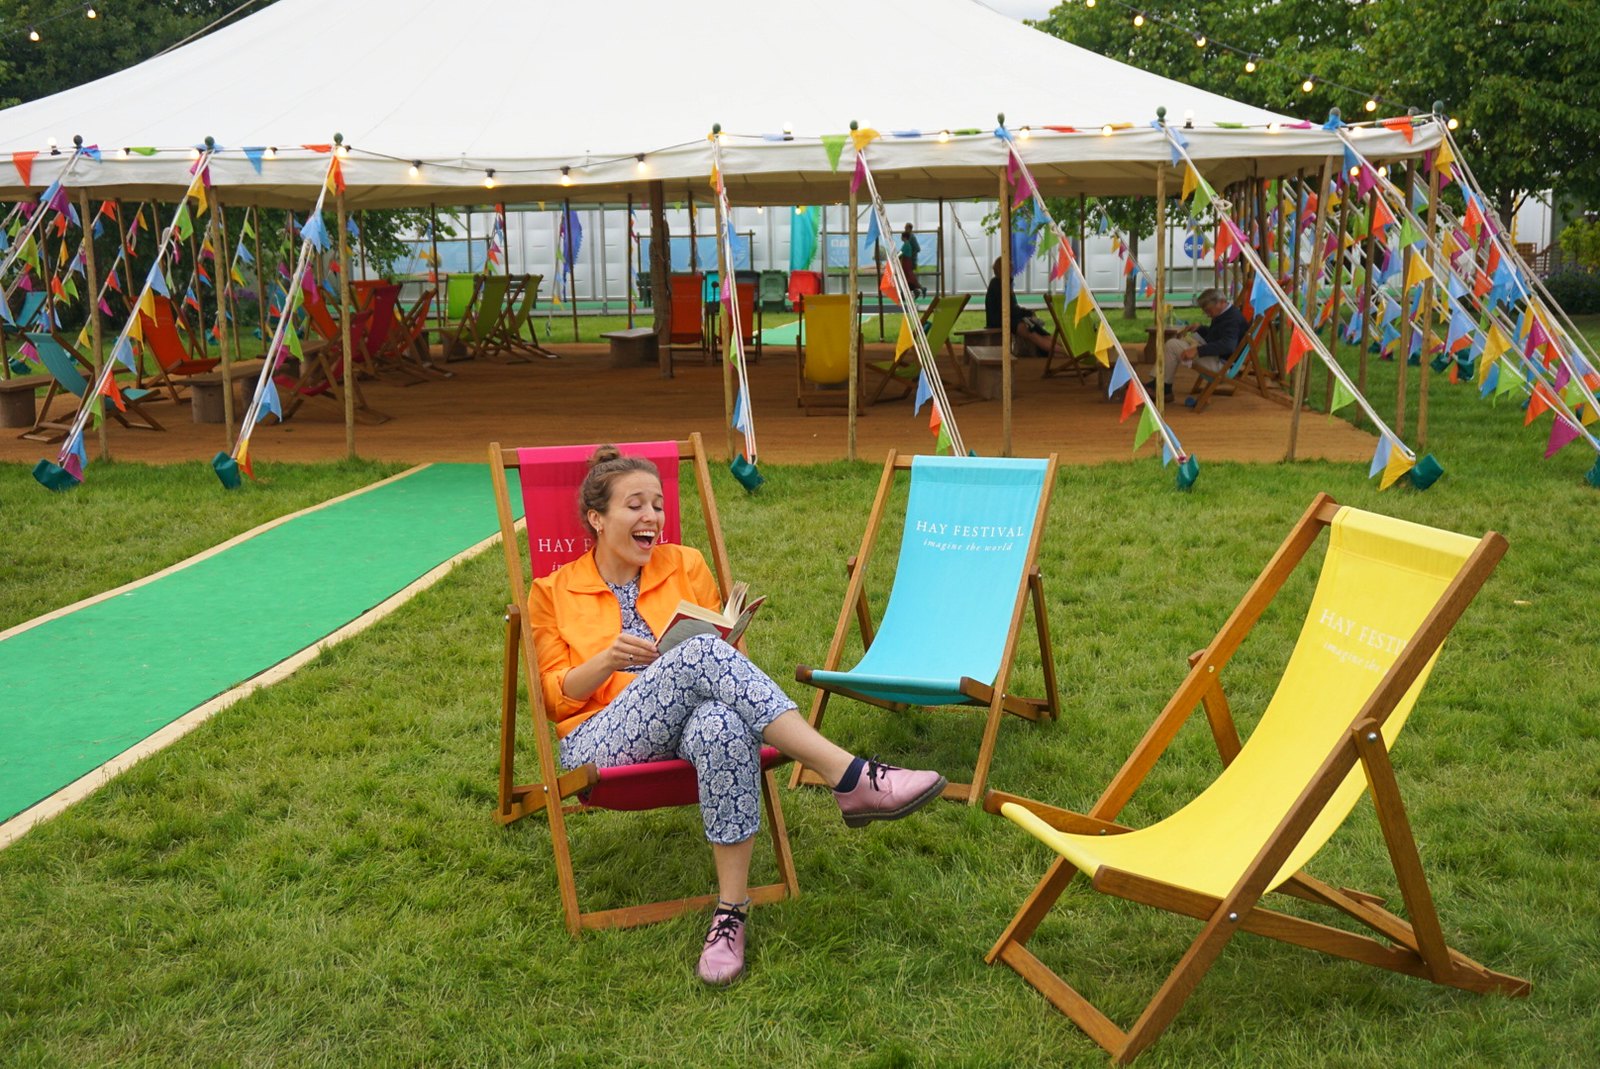 Hay On Wye Book Festival A Haven for Literature Lovers